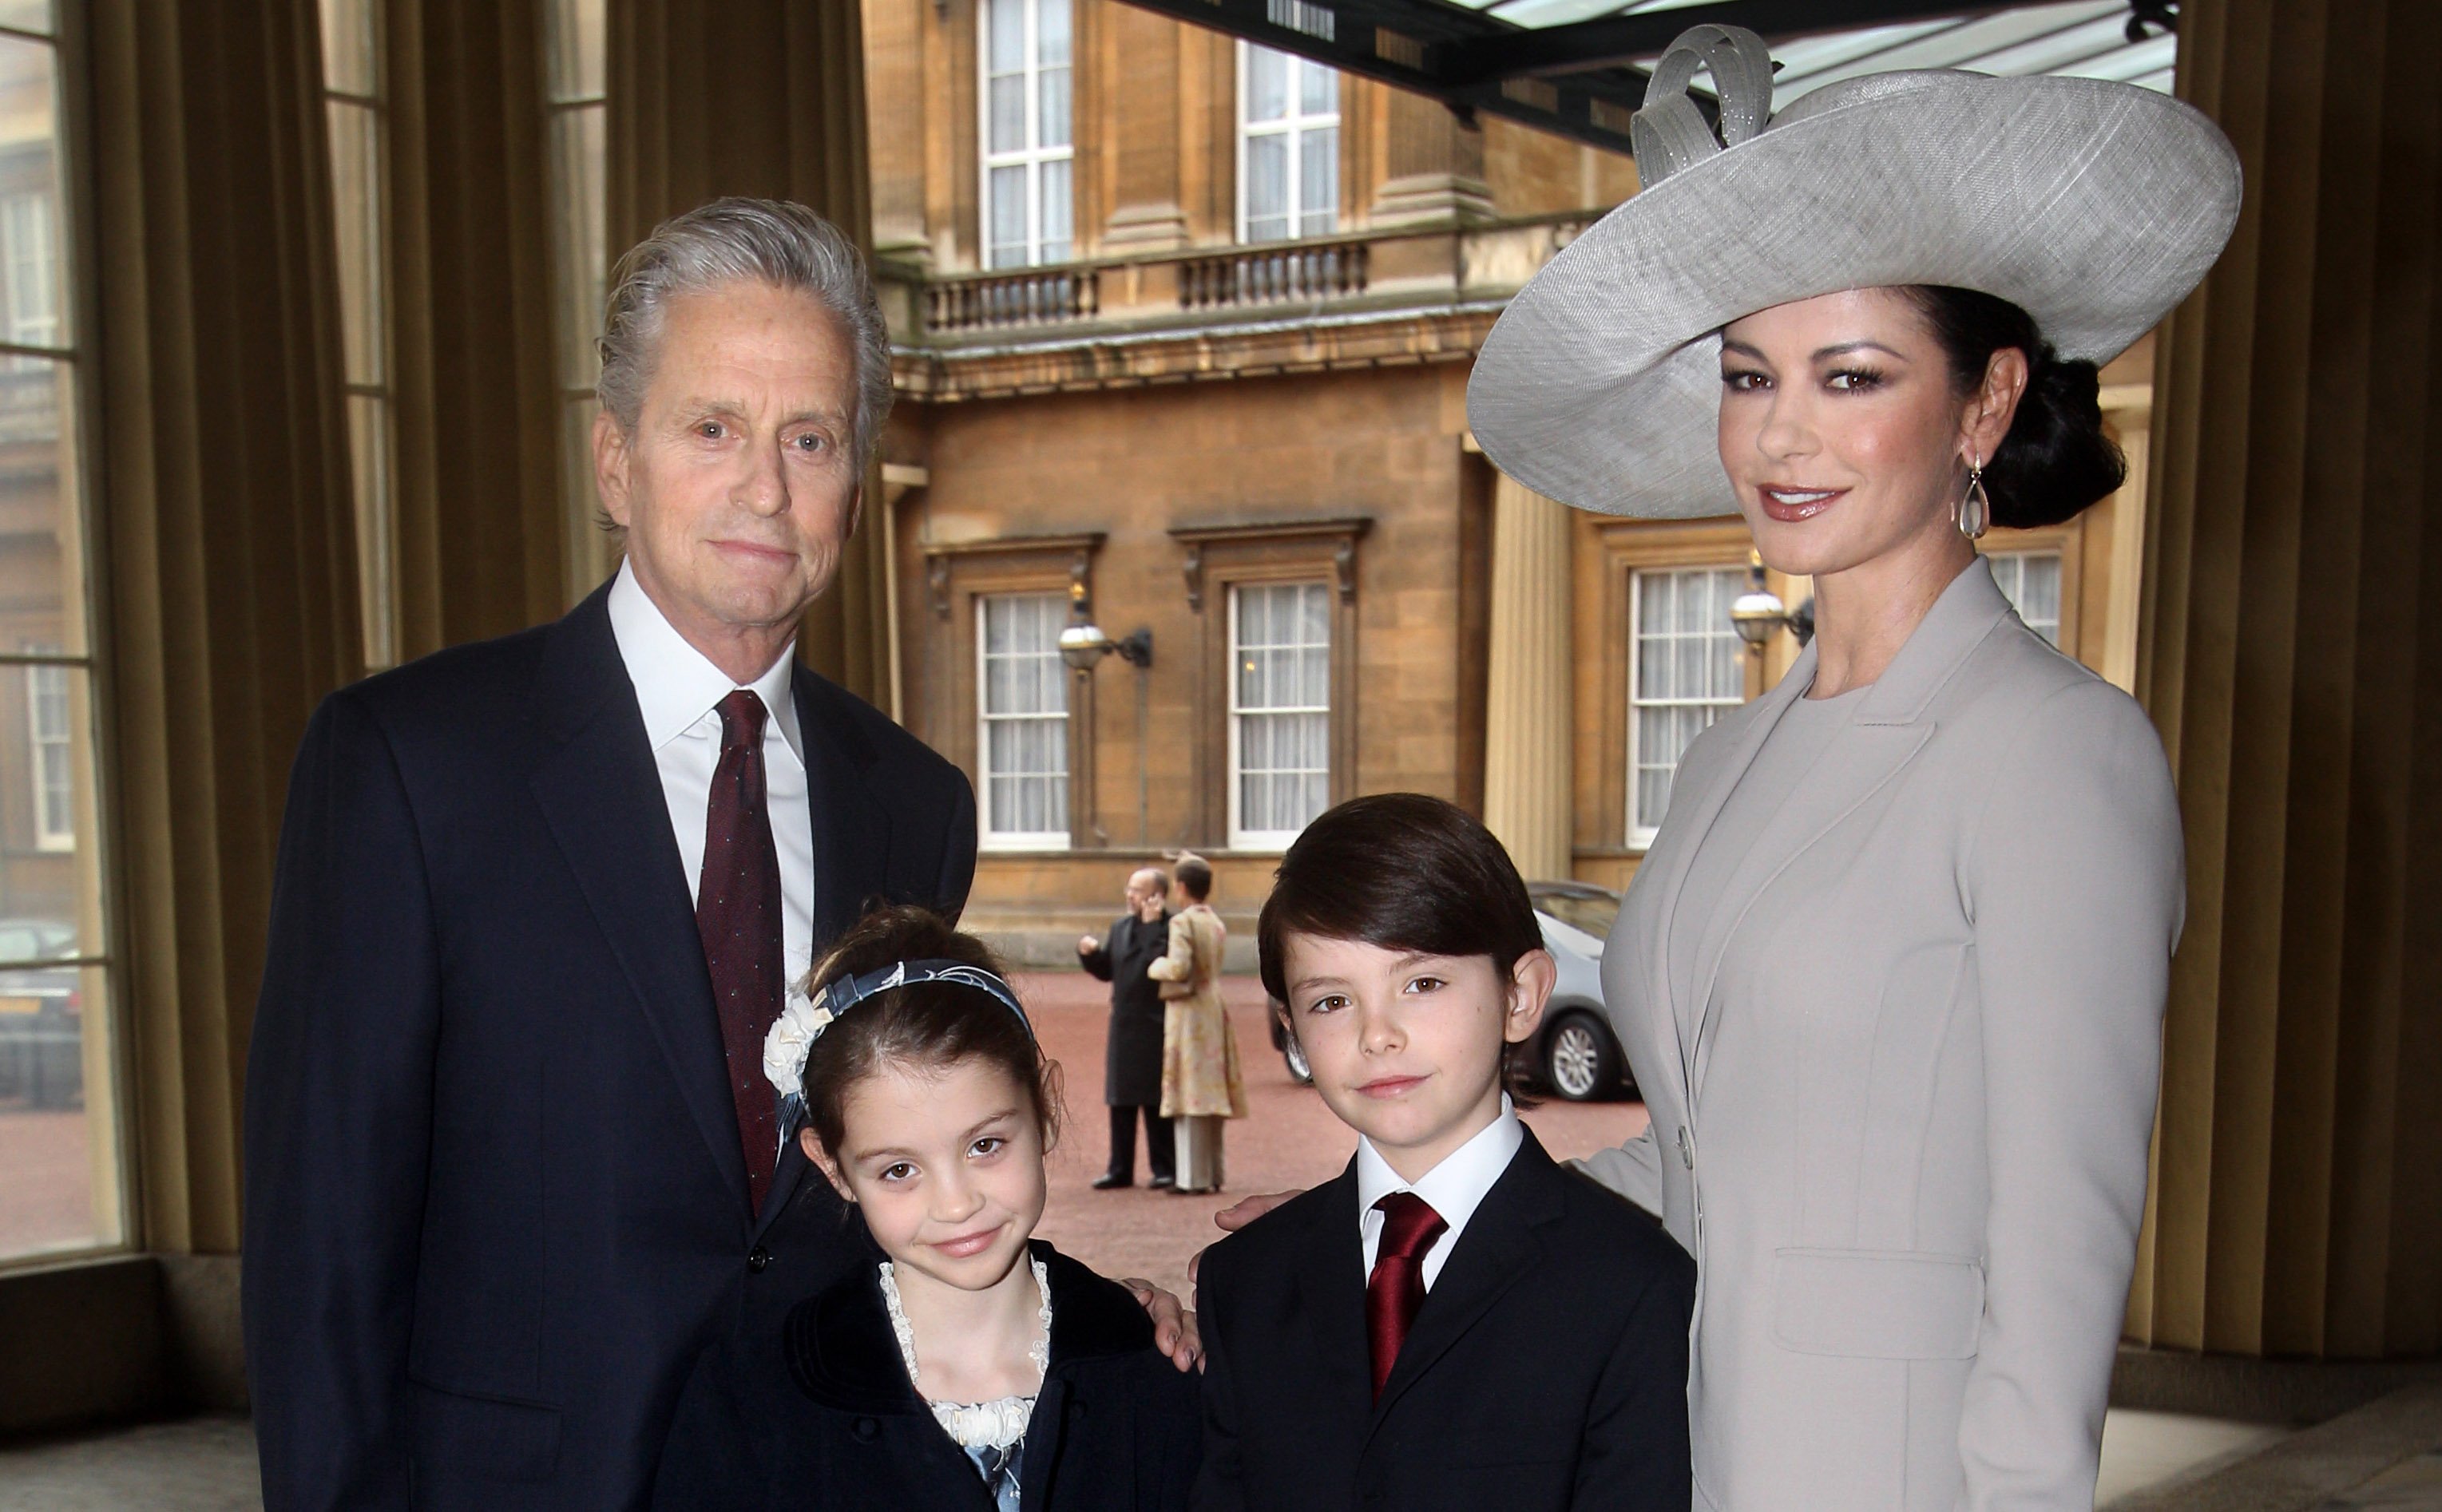 Actress Catherine Zeta-Jones (R) arrives with her husband, actor Michael Douglas and their children Dylan and Carys Douglas, to attend a Royal Investiture at Buckingham Palace on February 24, 2011 in London, England. | Source: Getty Images